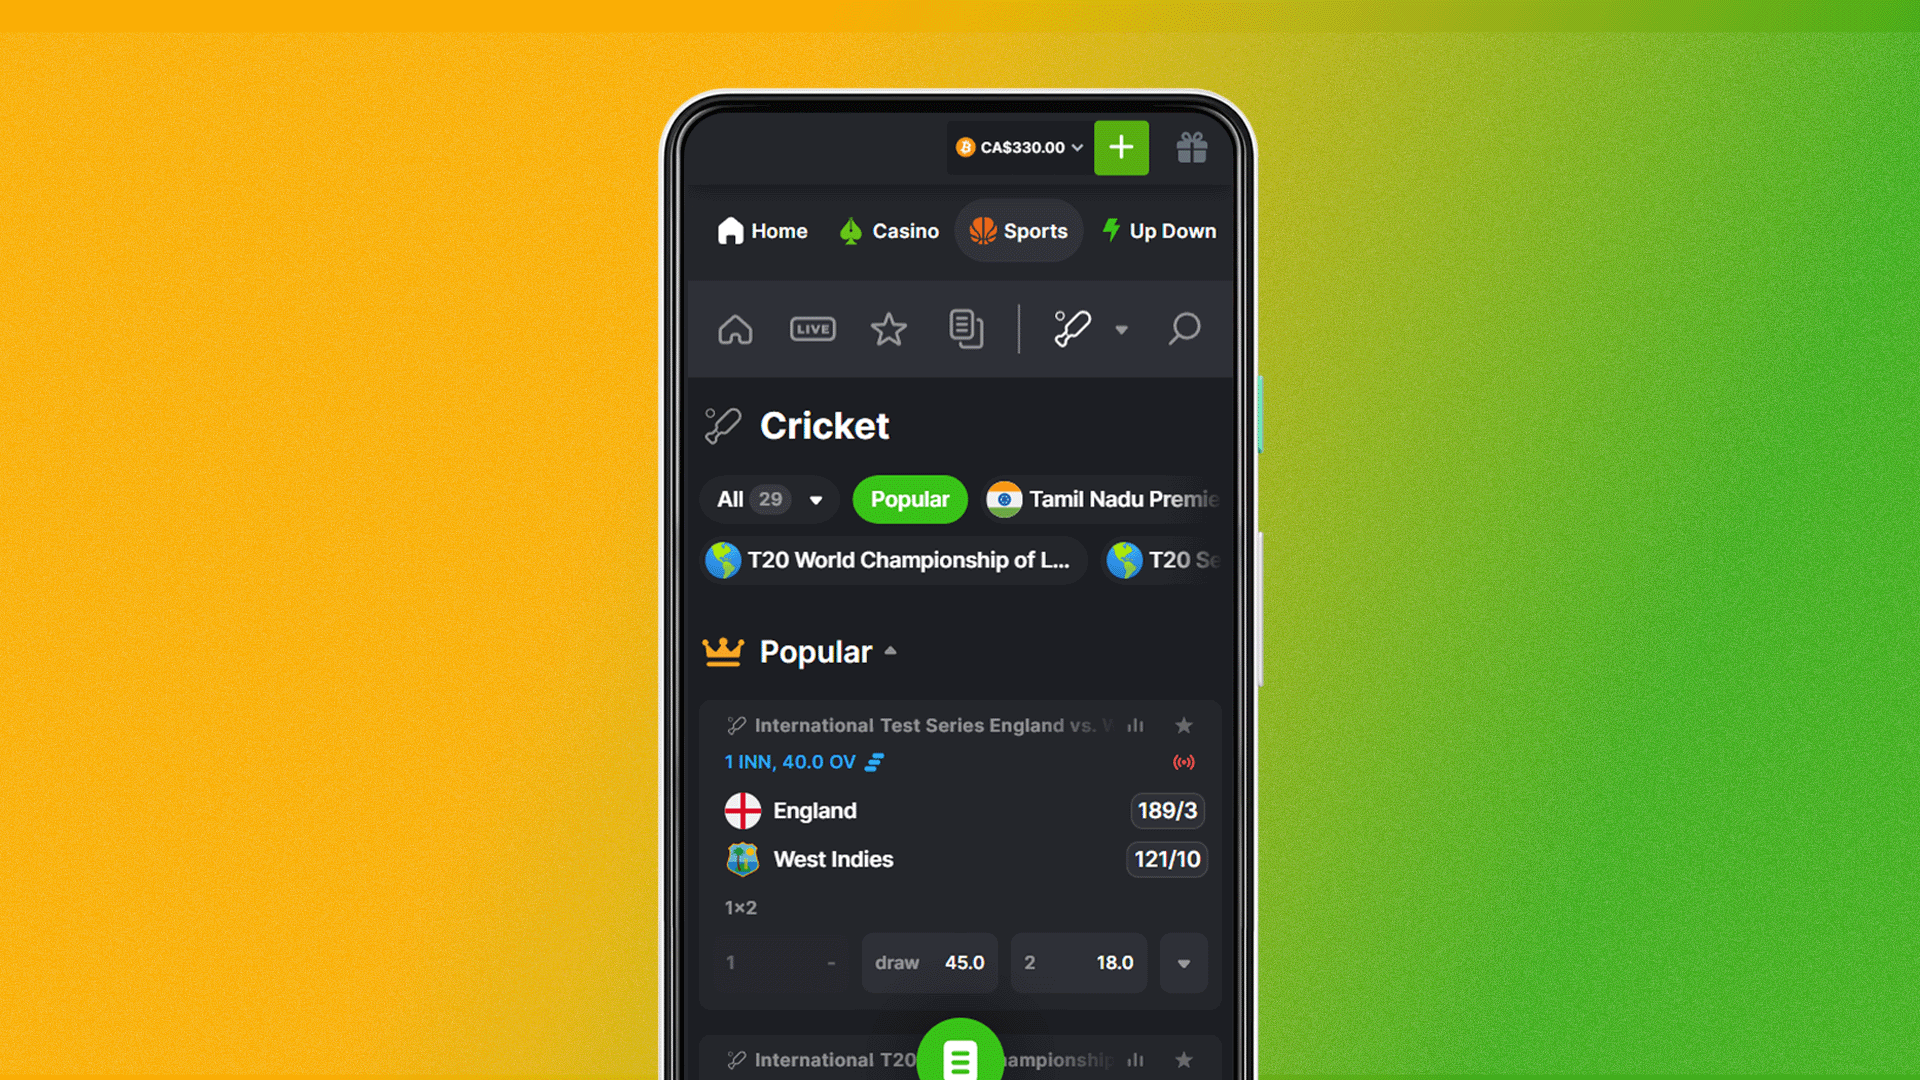 To place a bet find the cricket match you are interested in